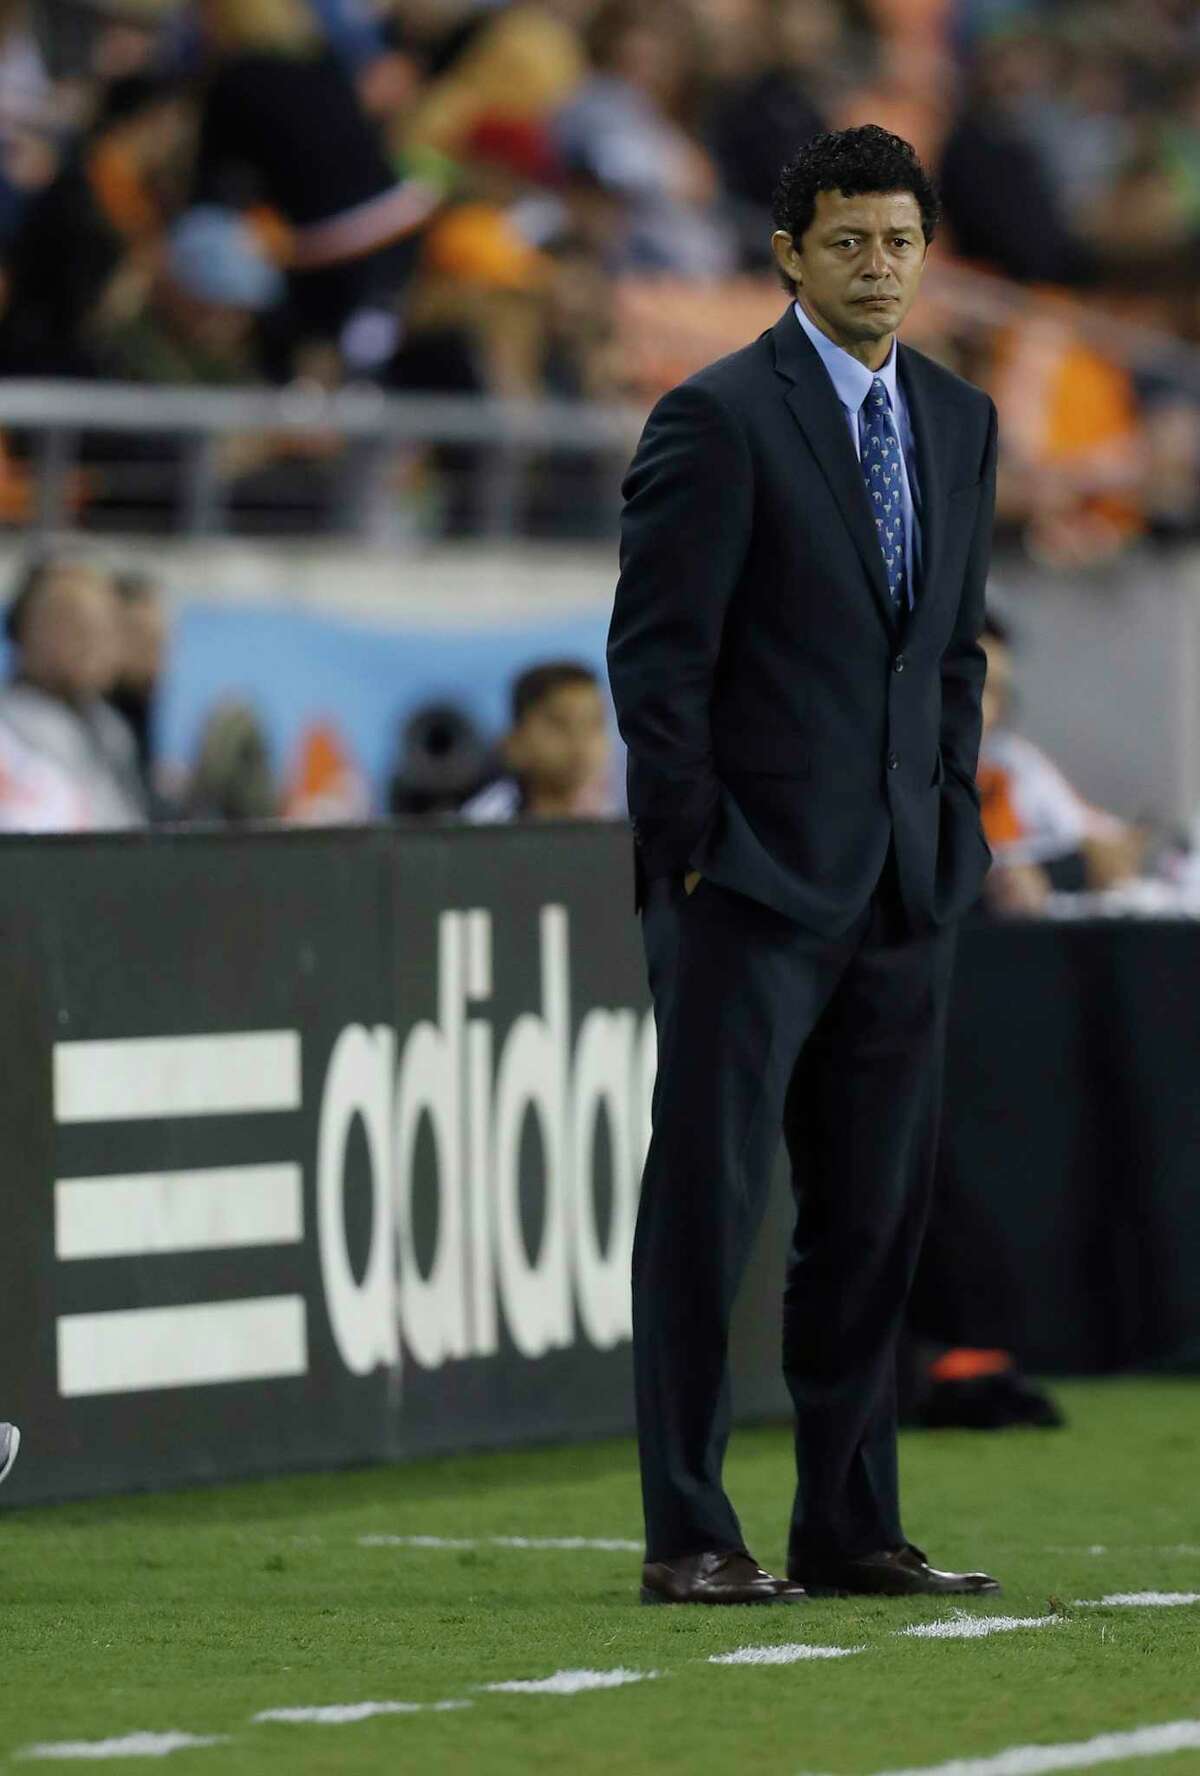 Houston Dynamo head coach Wilmer Cabrera on the sidelines during the first half of the season opening MLS soccer game at BBVA Compass stadium, Saturday, March 4, 2017, in Houston. ( Karen Warren / Houston Chronicle )